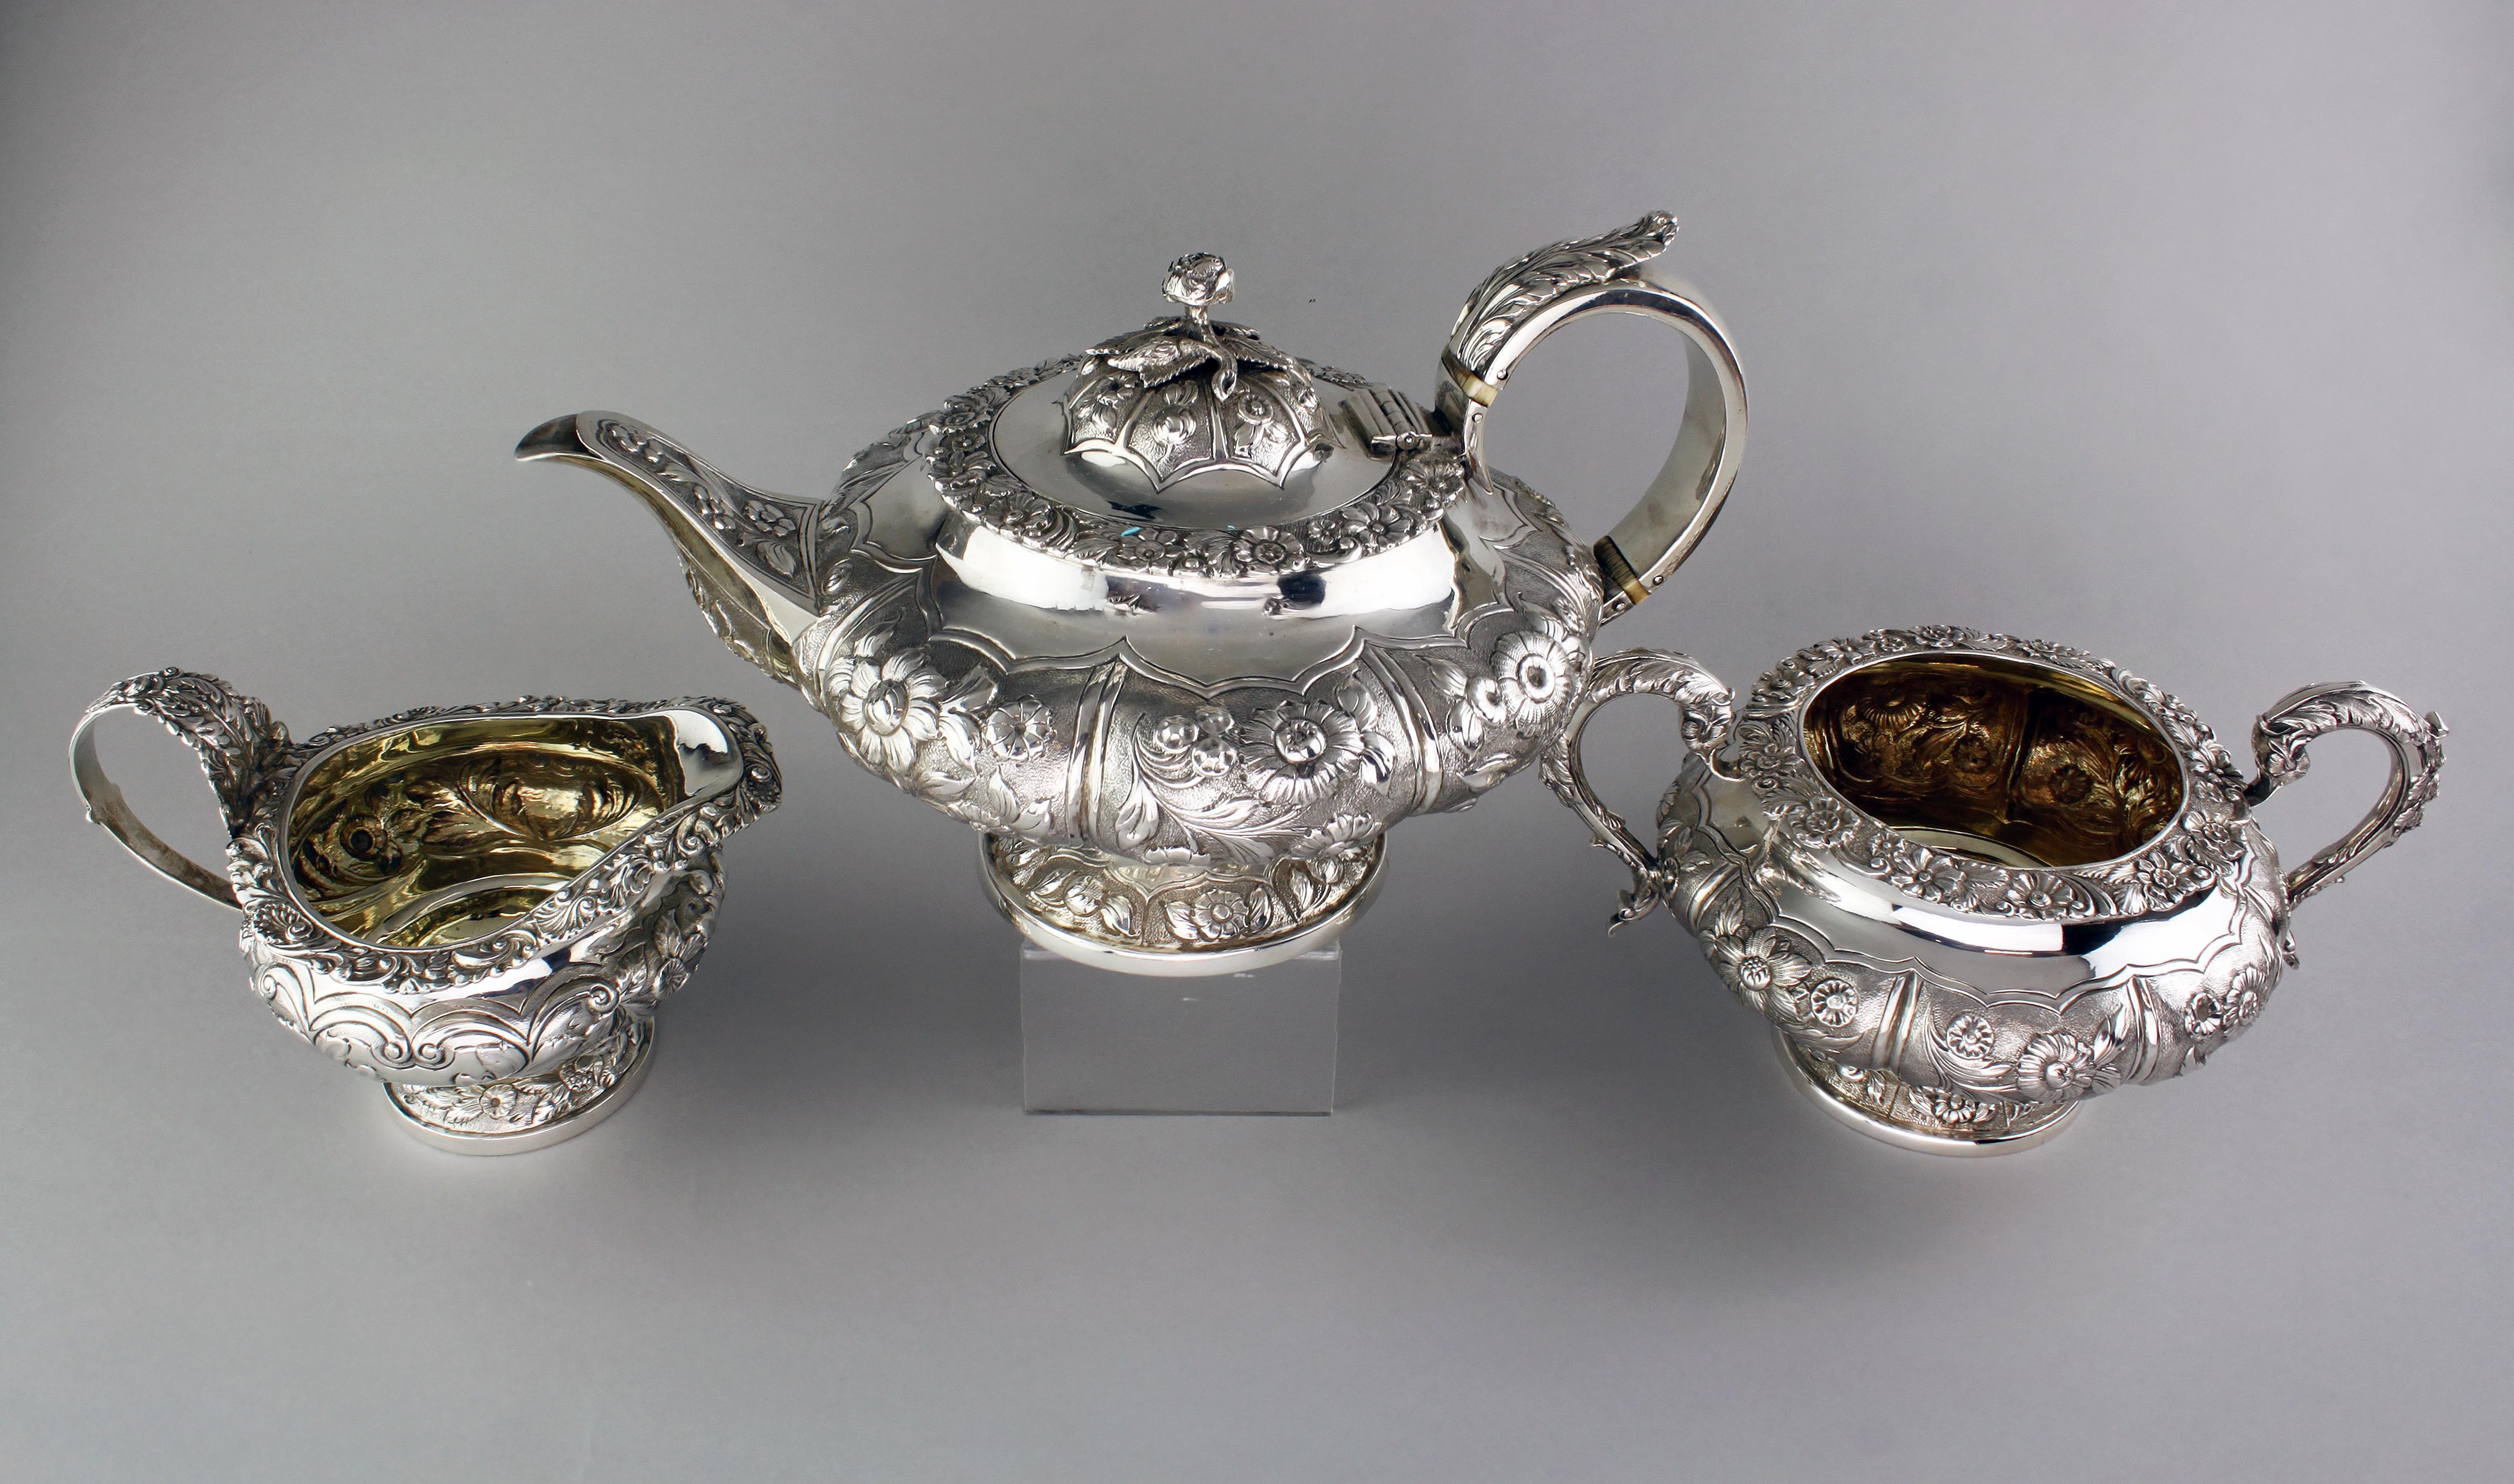 Antique Georgian (George III era) sterling silver three-piece tea service set
Maker: Richard Pearce & George Burrows & William Hewitt
Made in London 1828 and 1829
Fully hallmarked.

Dimensions:
Teapot size: 28.5 x 19 x 15.7 cm
Cream jar size: